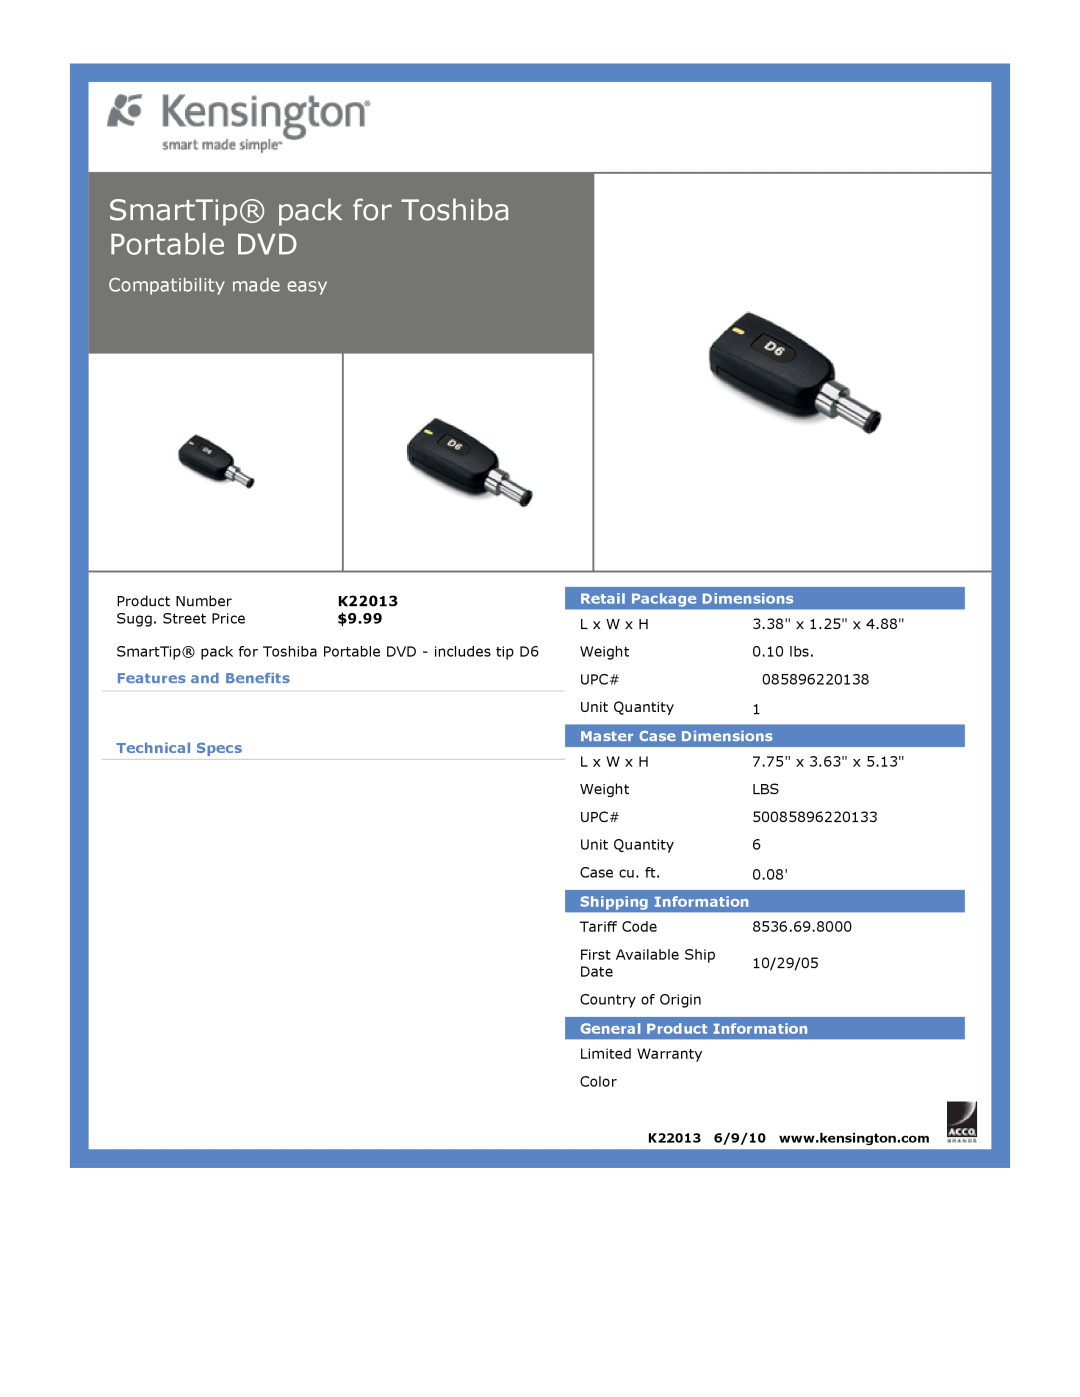 Kensington EU64325 SmartTip pack for Toshiba Portable DVD, Compatibility made easy, $9.99, Retail Package Dimensions 